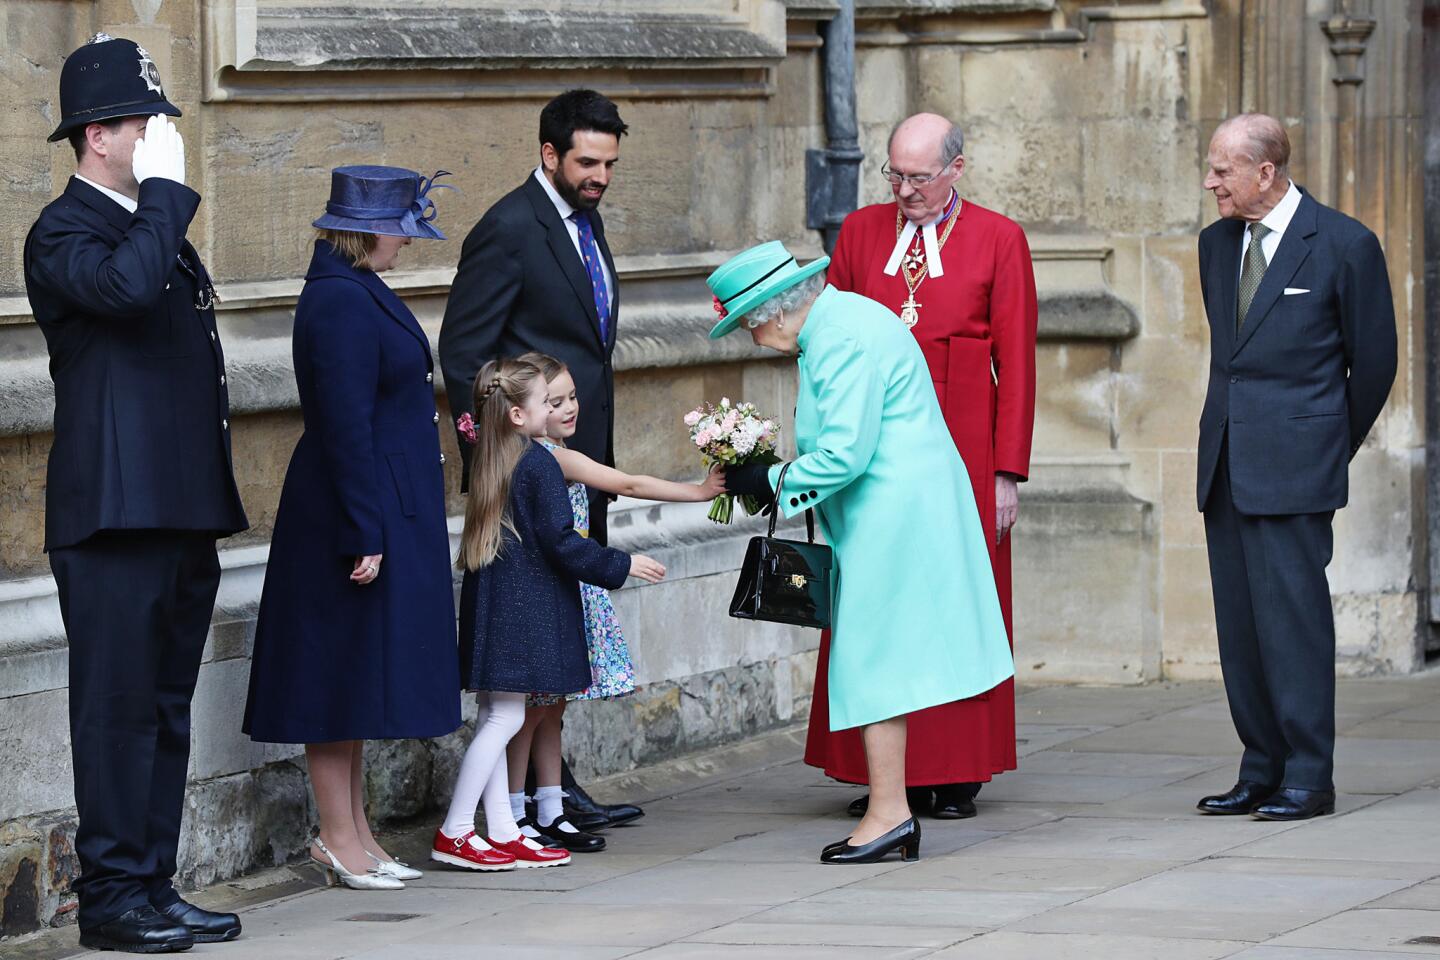 Queen Elizabeth II and Prince Philip leave St. George's Chapel at Windsor Castle on April 16 after Easter service.